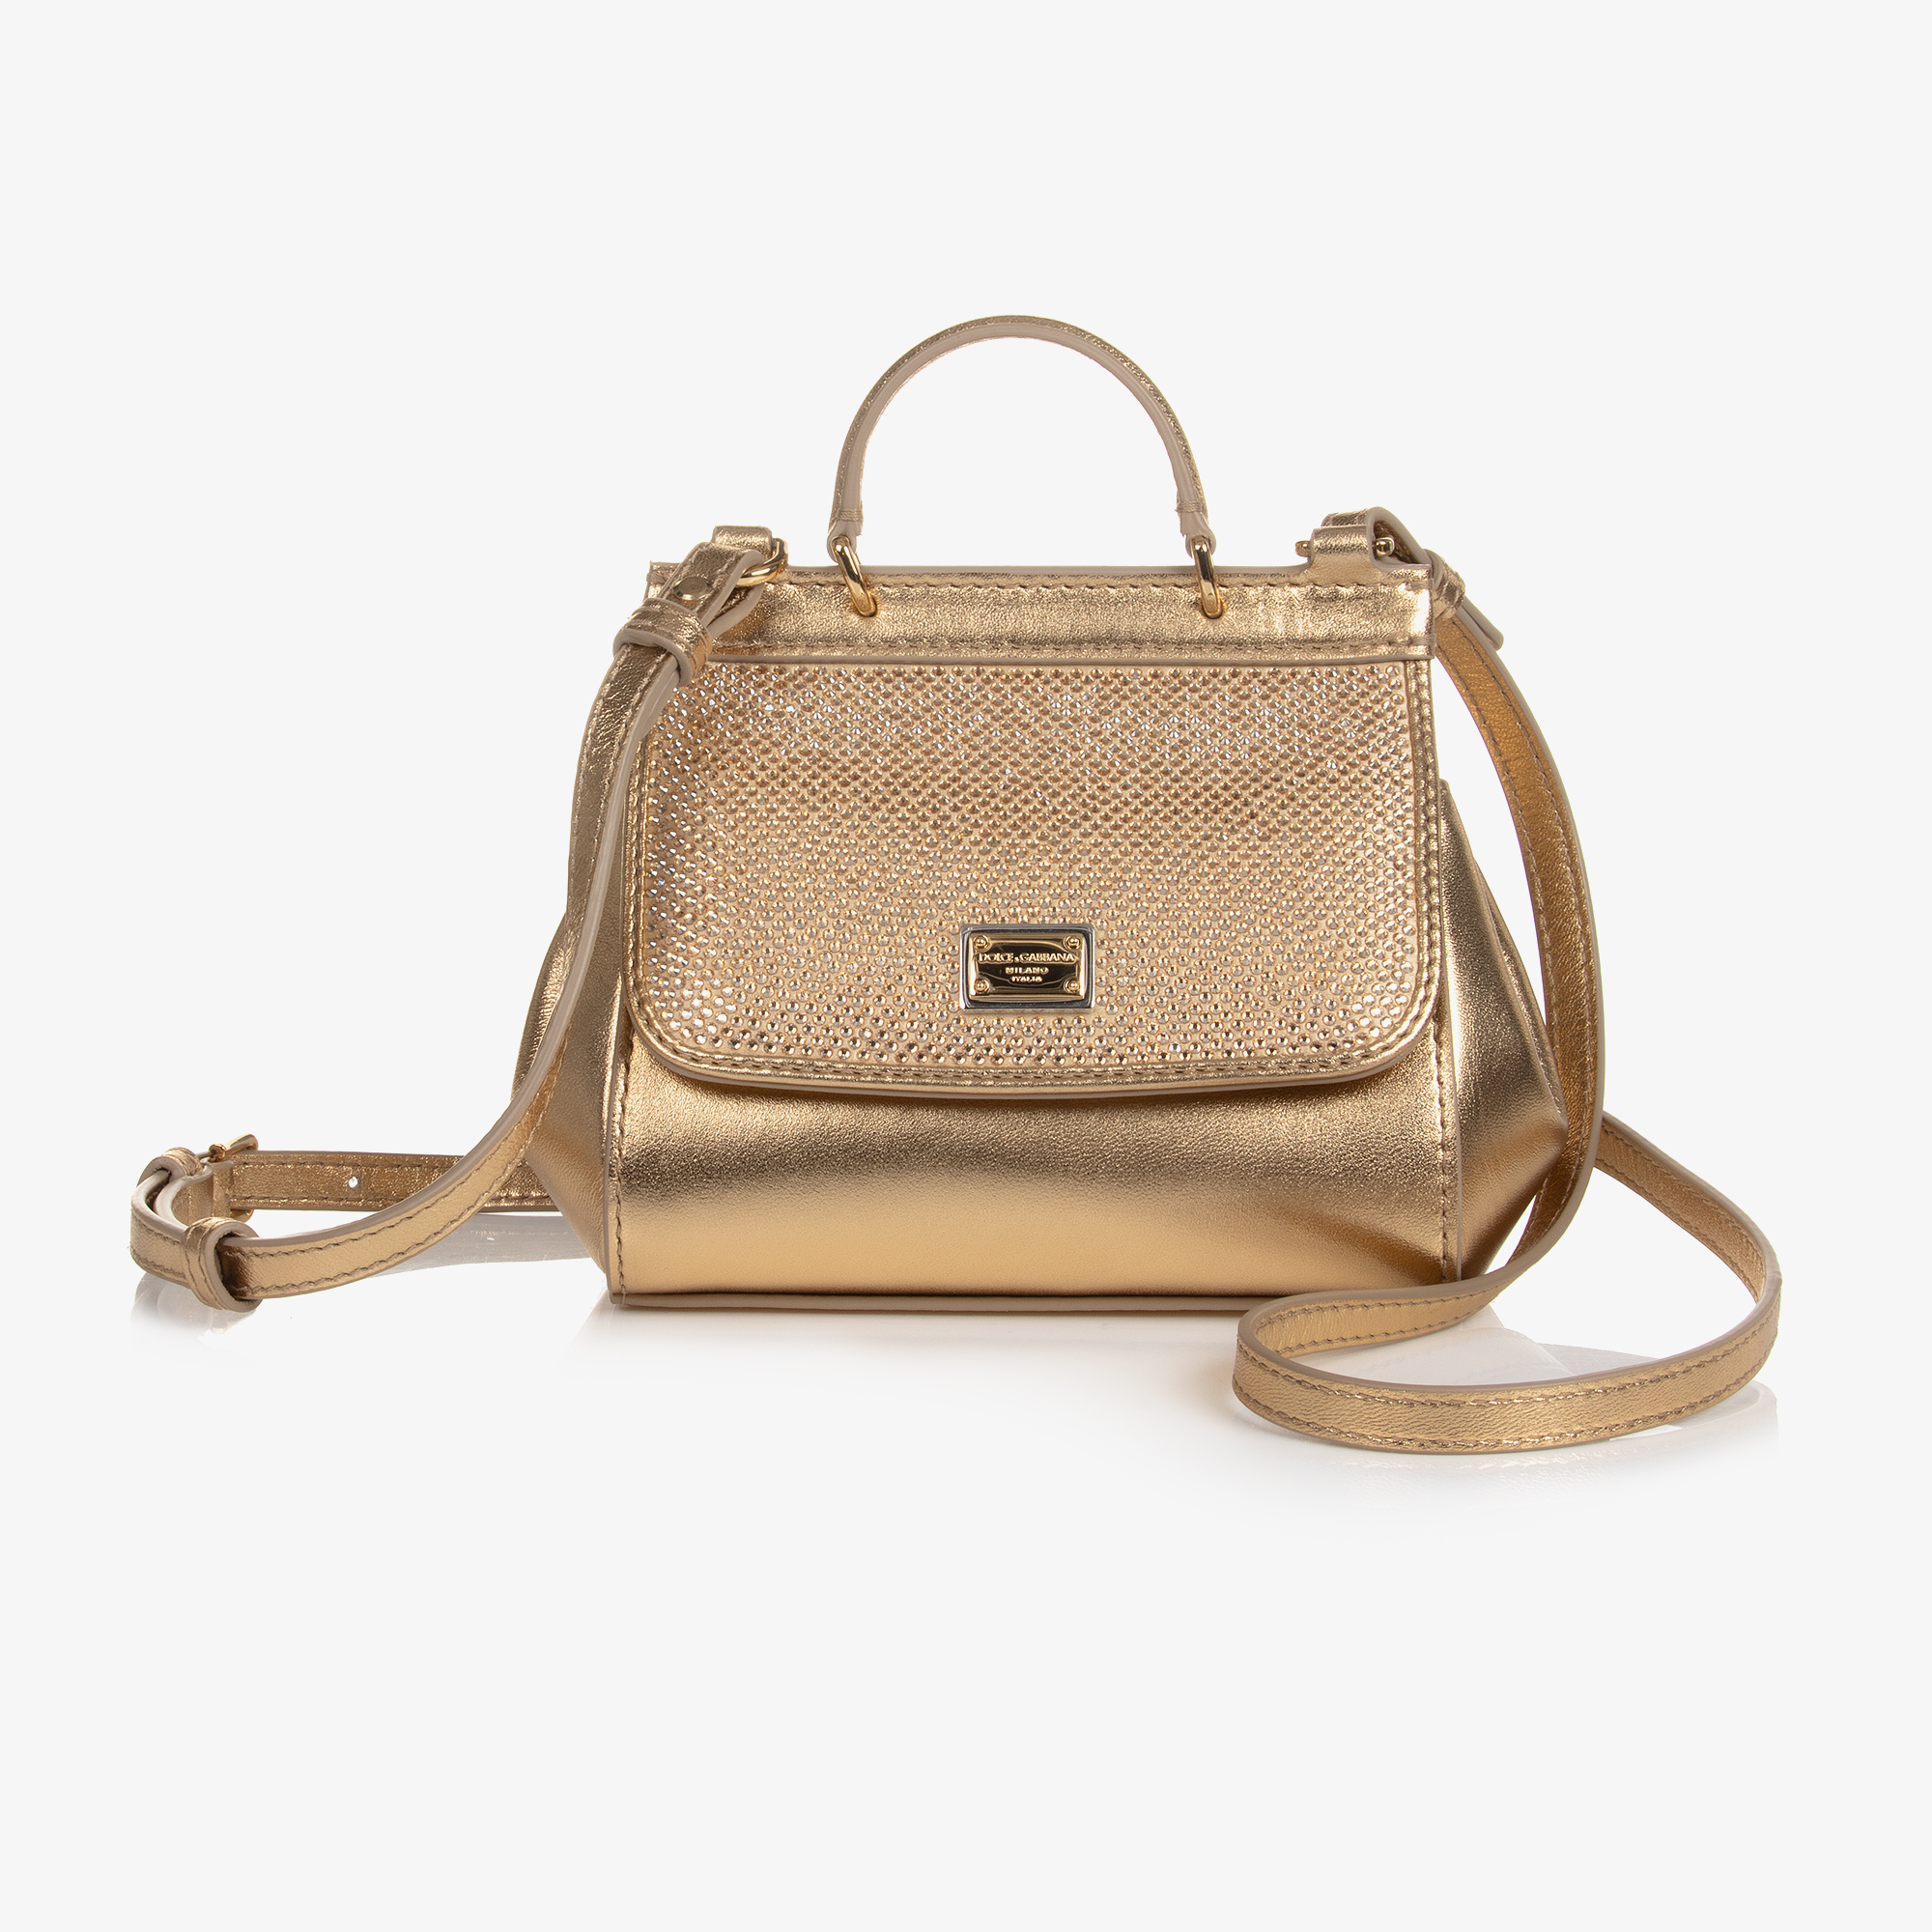 Sicily Small Metallic Leather Tote Bag in Gold - Dolce Gabbana